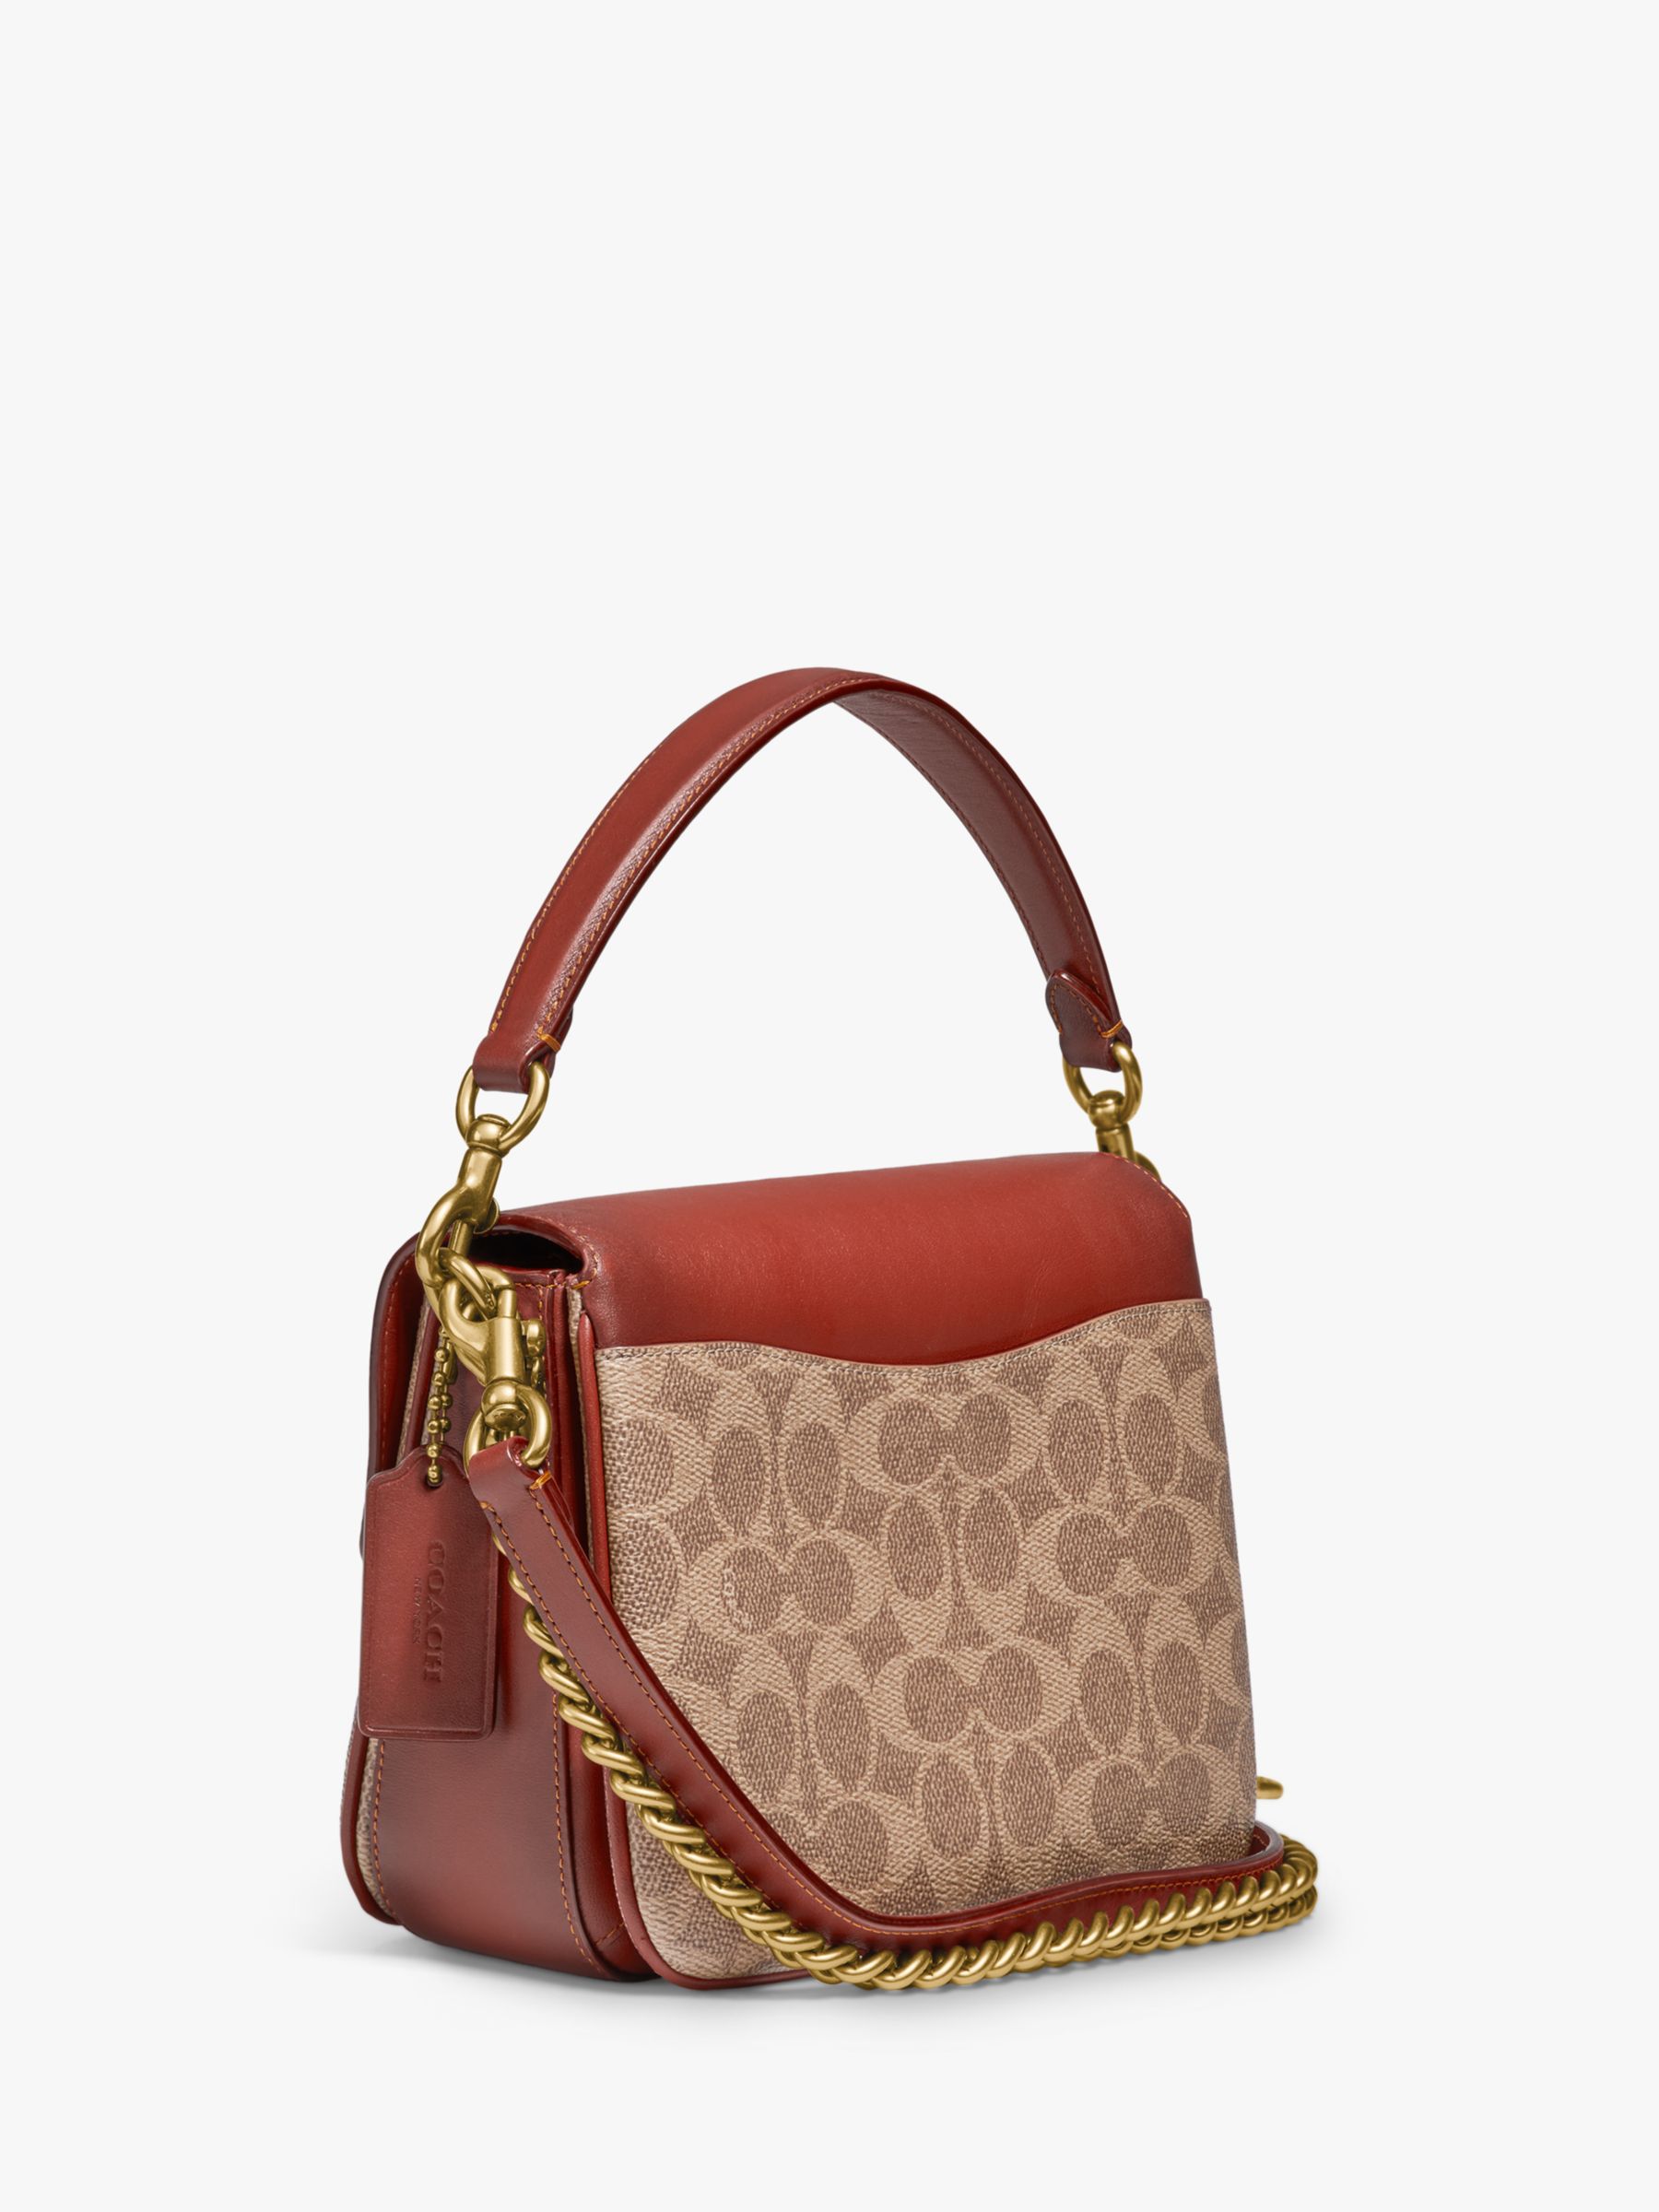 Buy Coach Cassie 19 Leather Cross Body Bag, Tan Rust Online at johnlewis.com